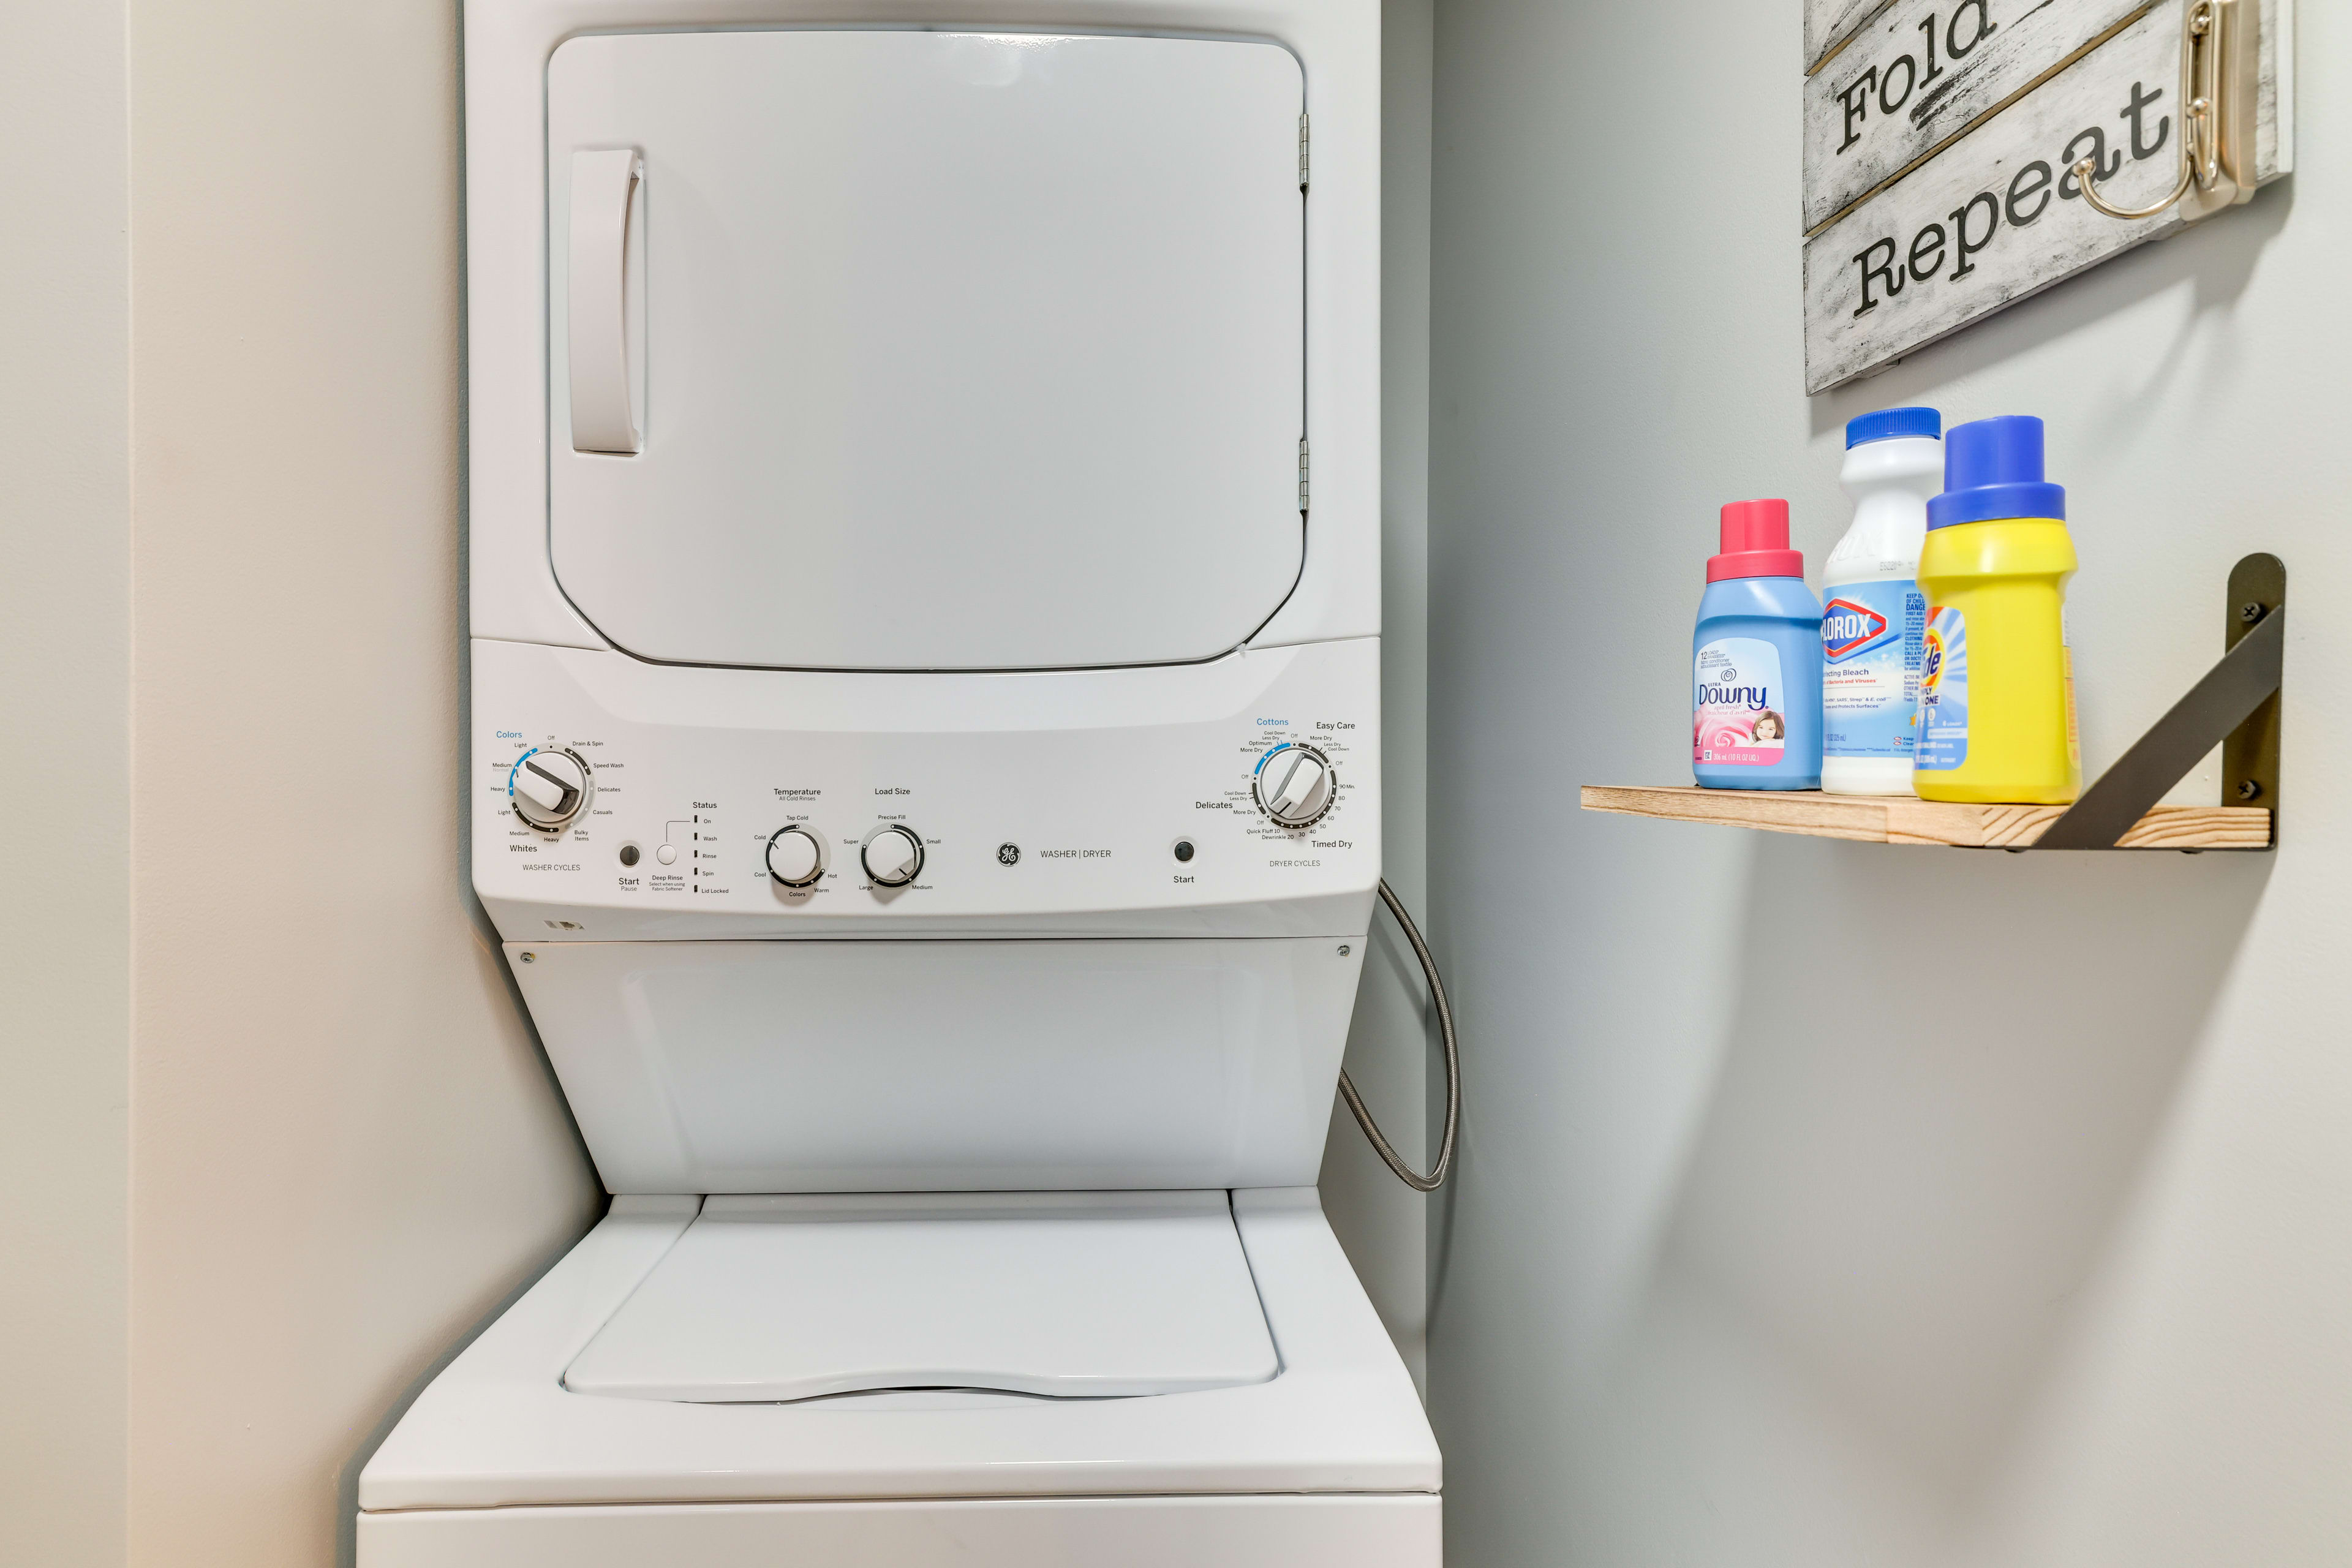 Laundry Room | Detergent Provided